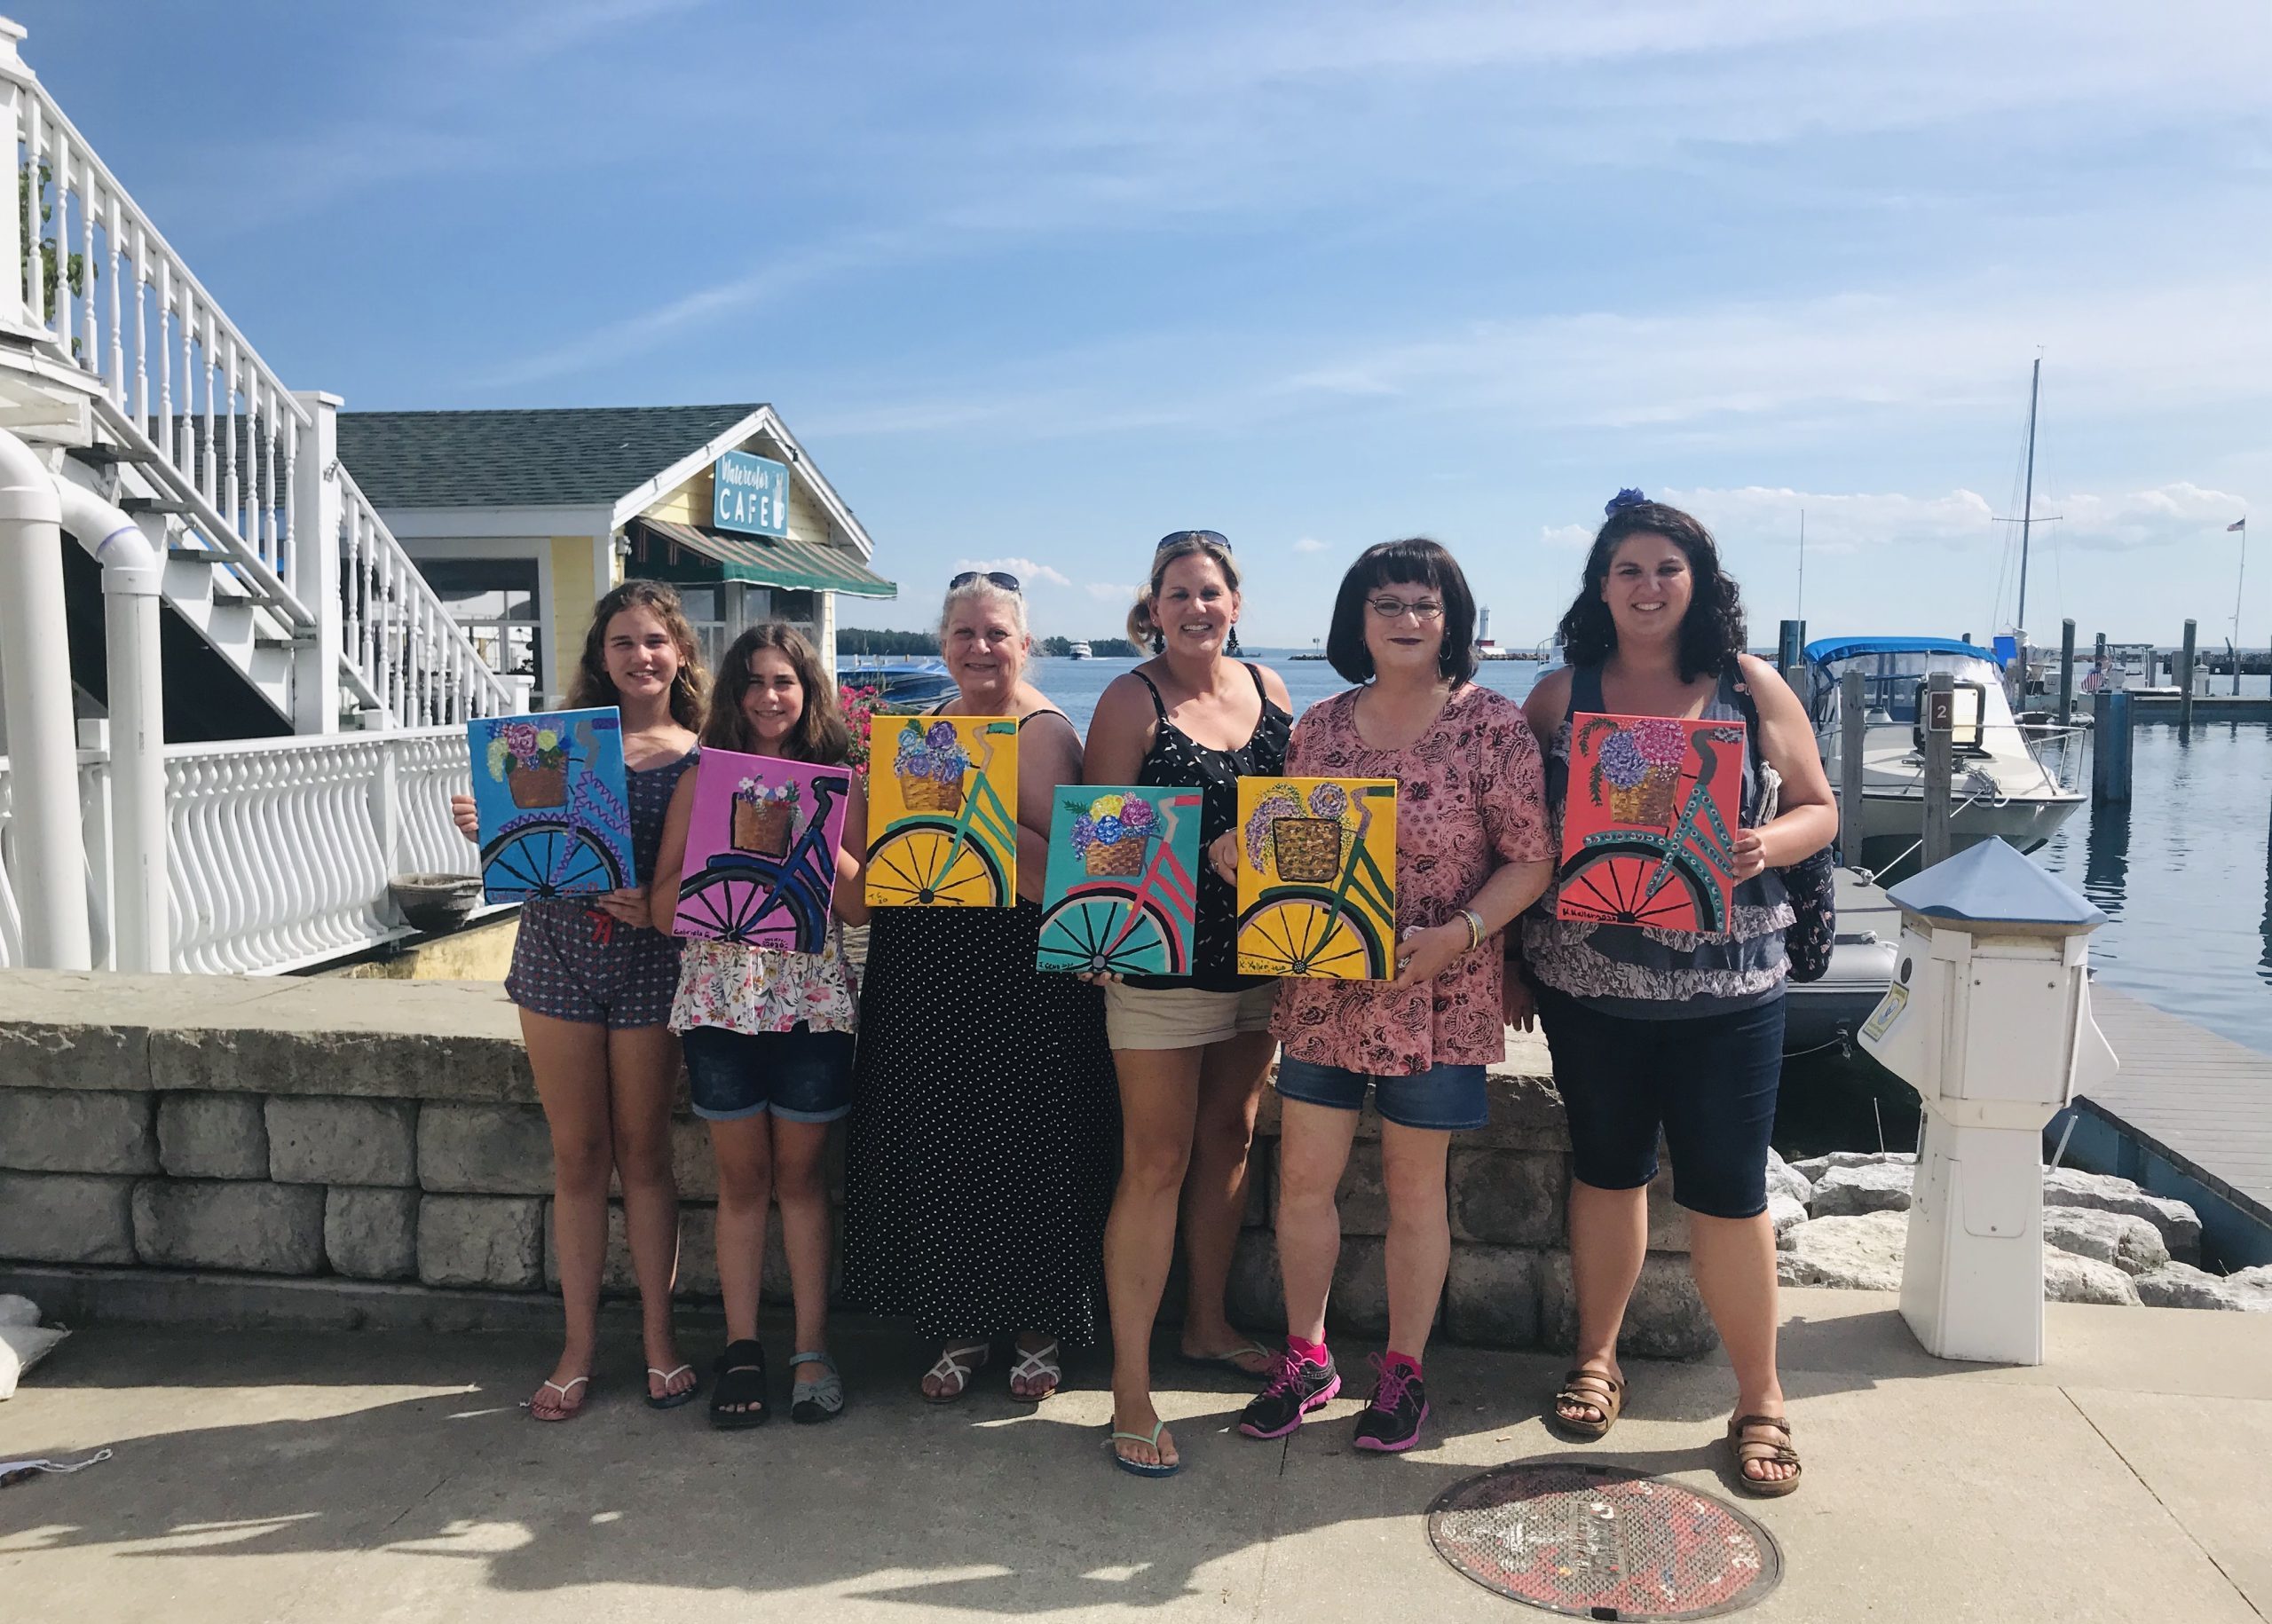 A group of women and girls show off the paintings they made in an art class at Watercolor Café on Mackinac Island